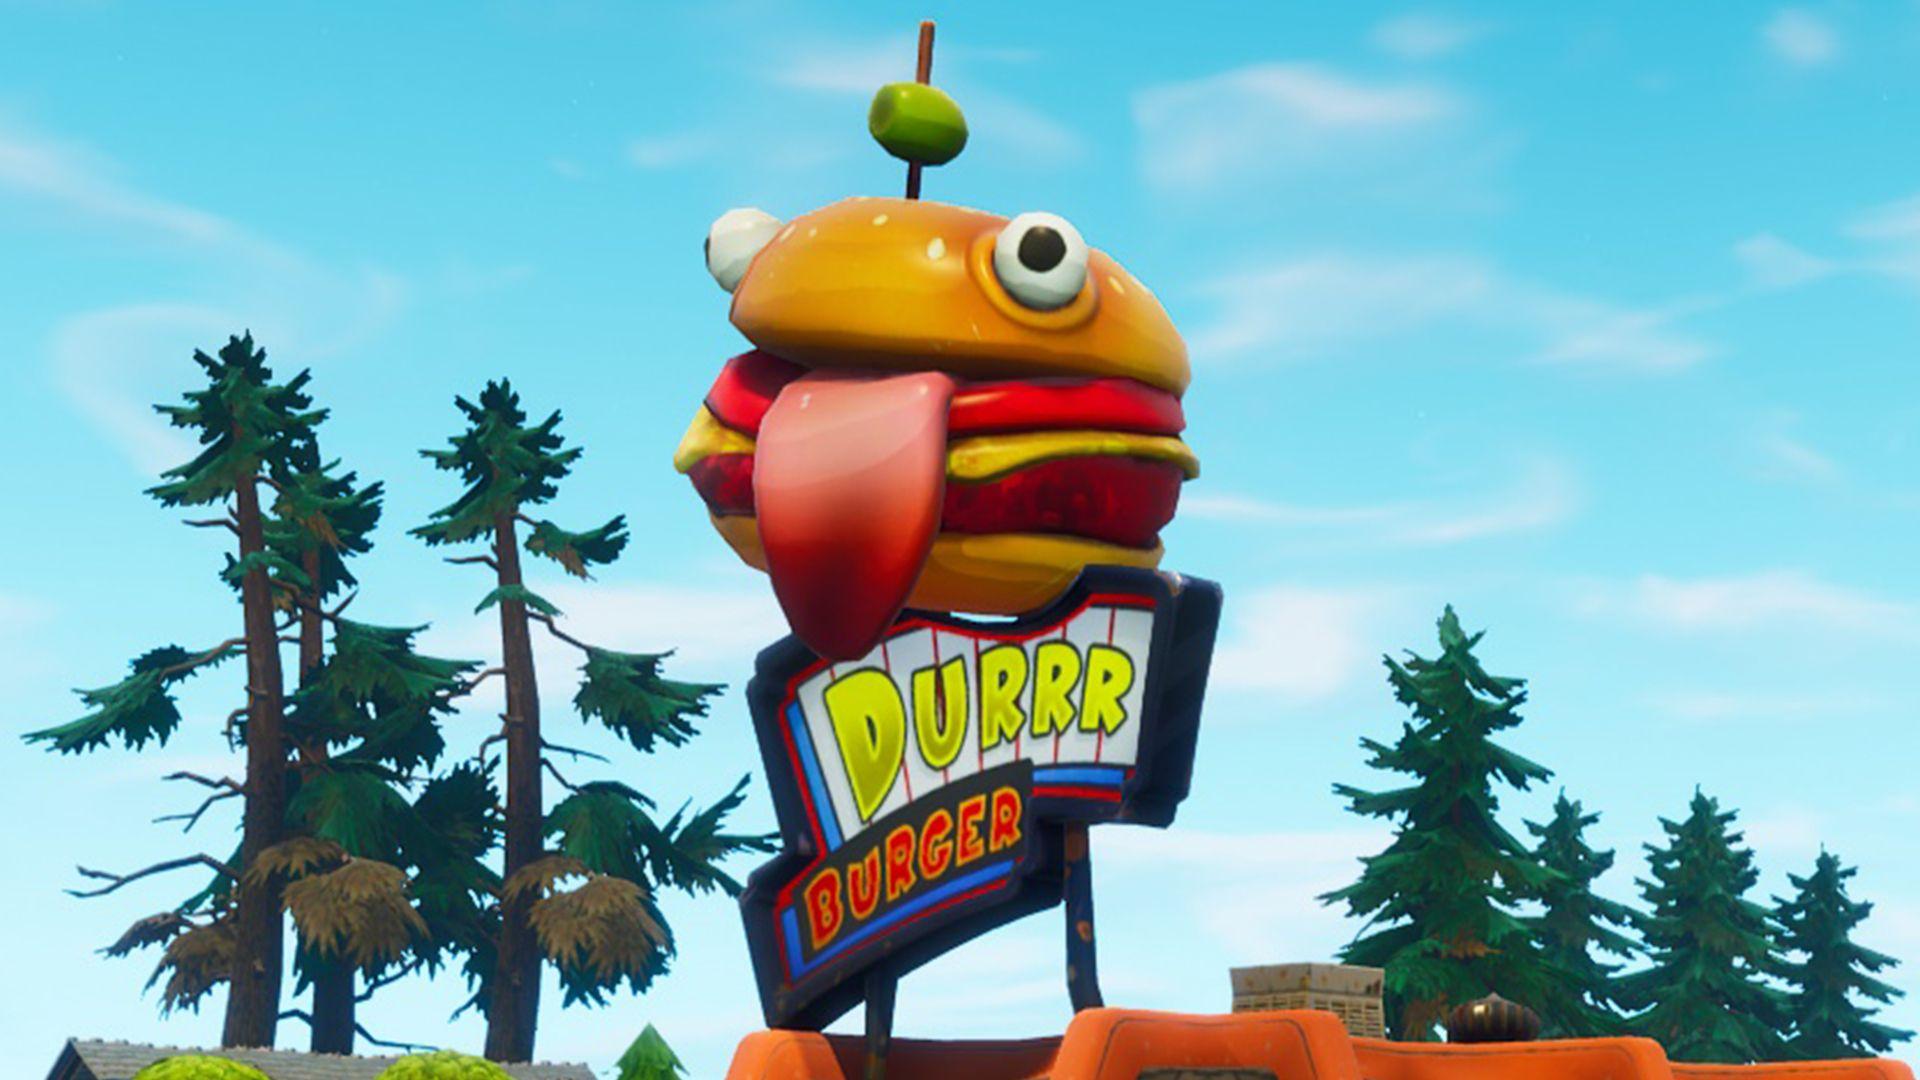 Fortnite's new skins include the Durr Burger, a sushi chef, and The.